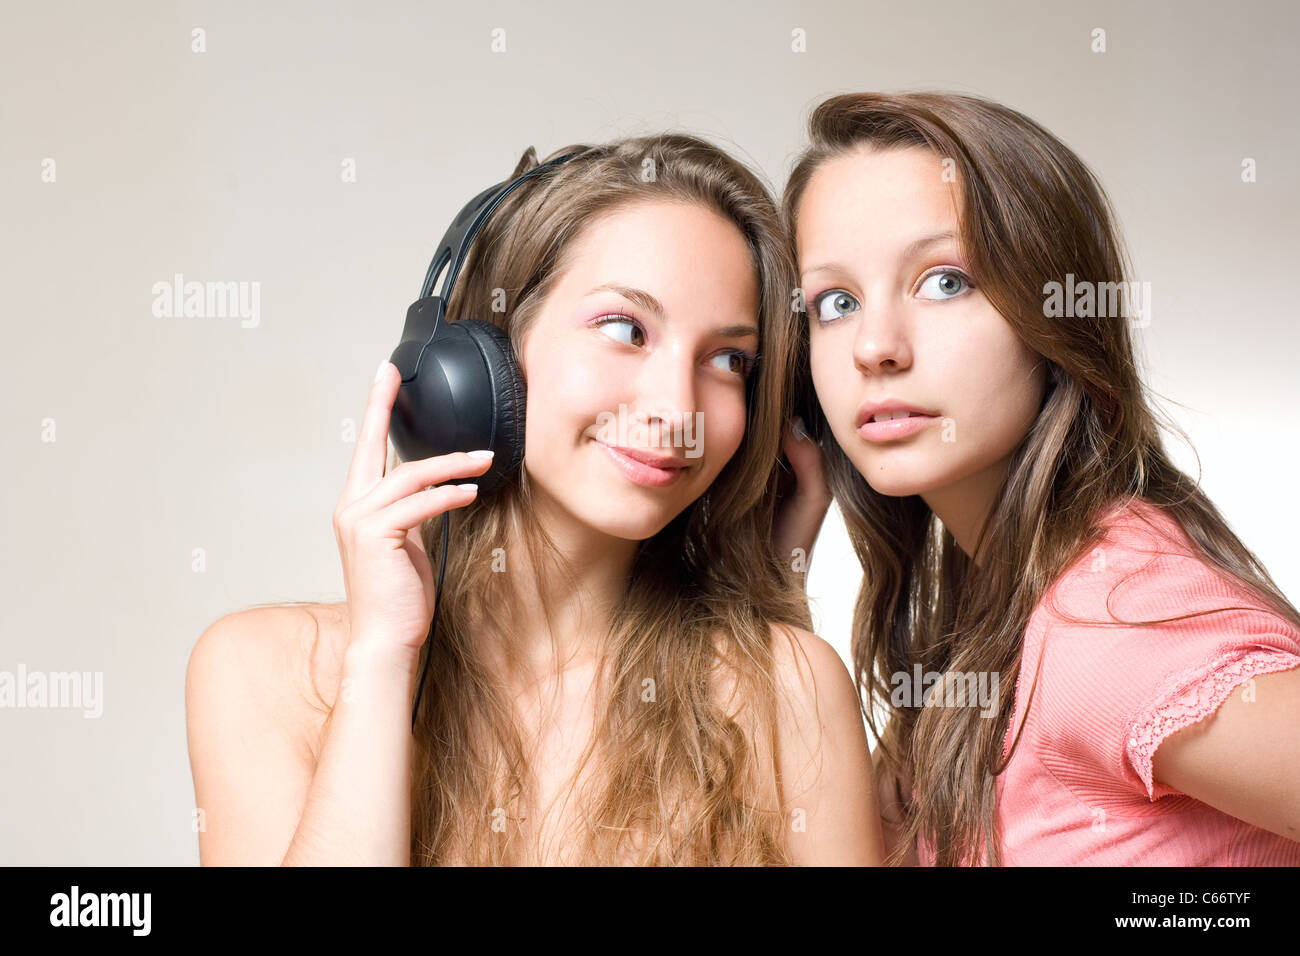 Two beautiful young brunettes sharin their music playing with their headphones. Stock Photo